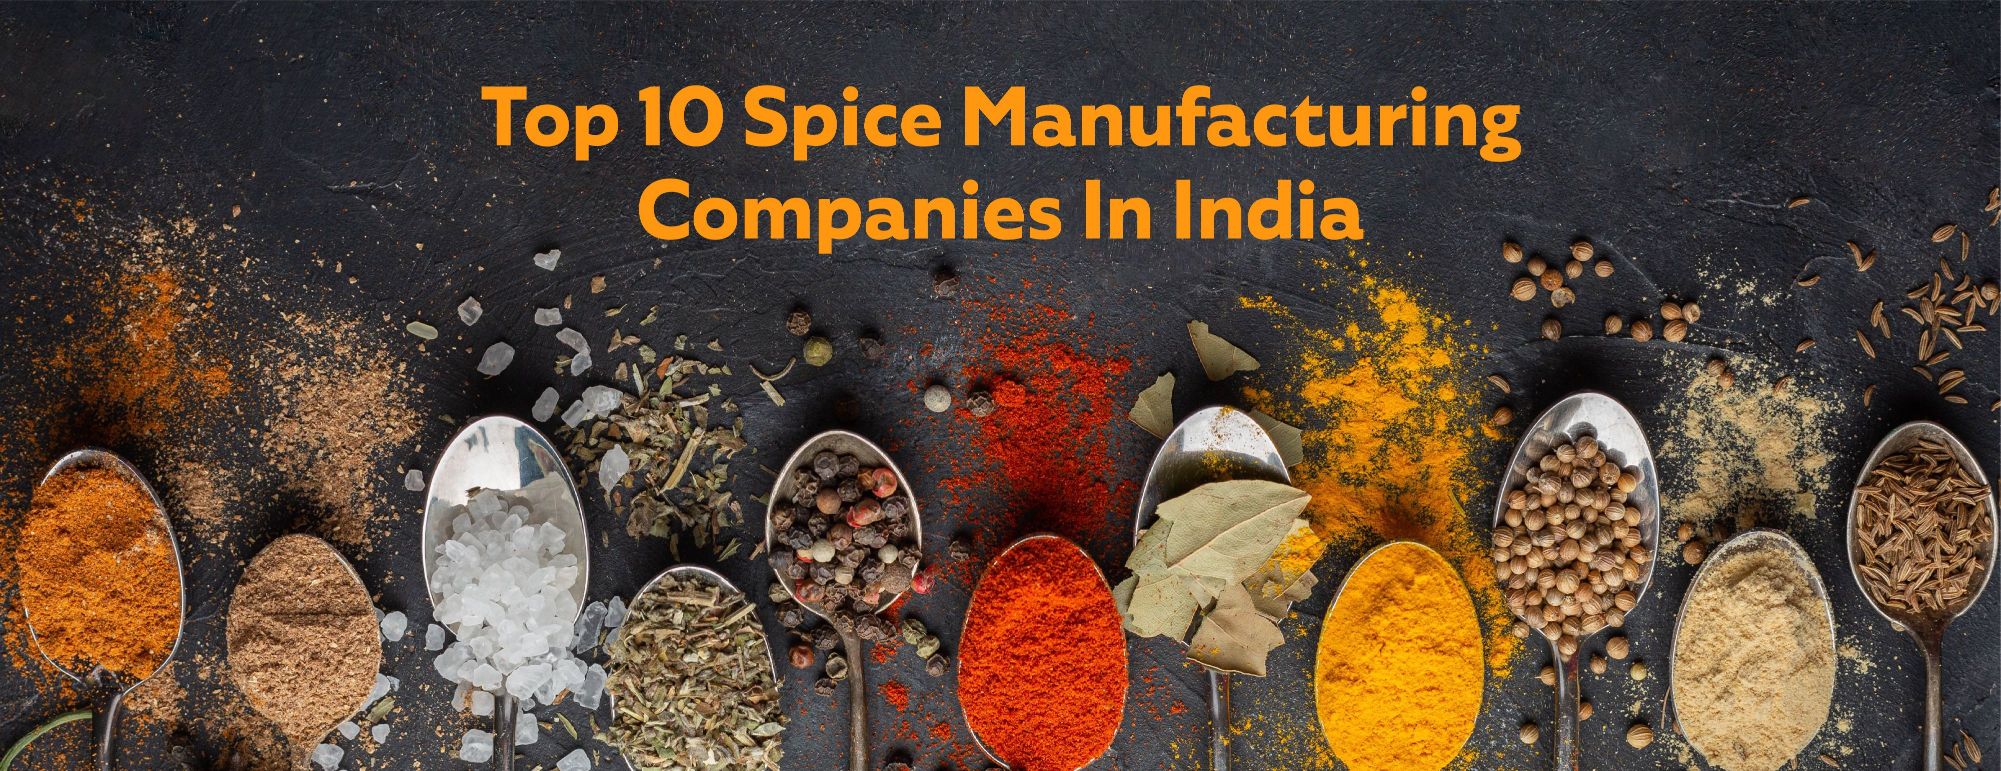 Top 10 Spice Manufacturing Companies in India